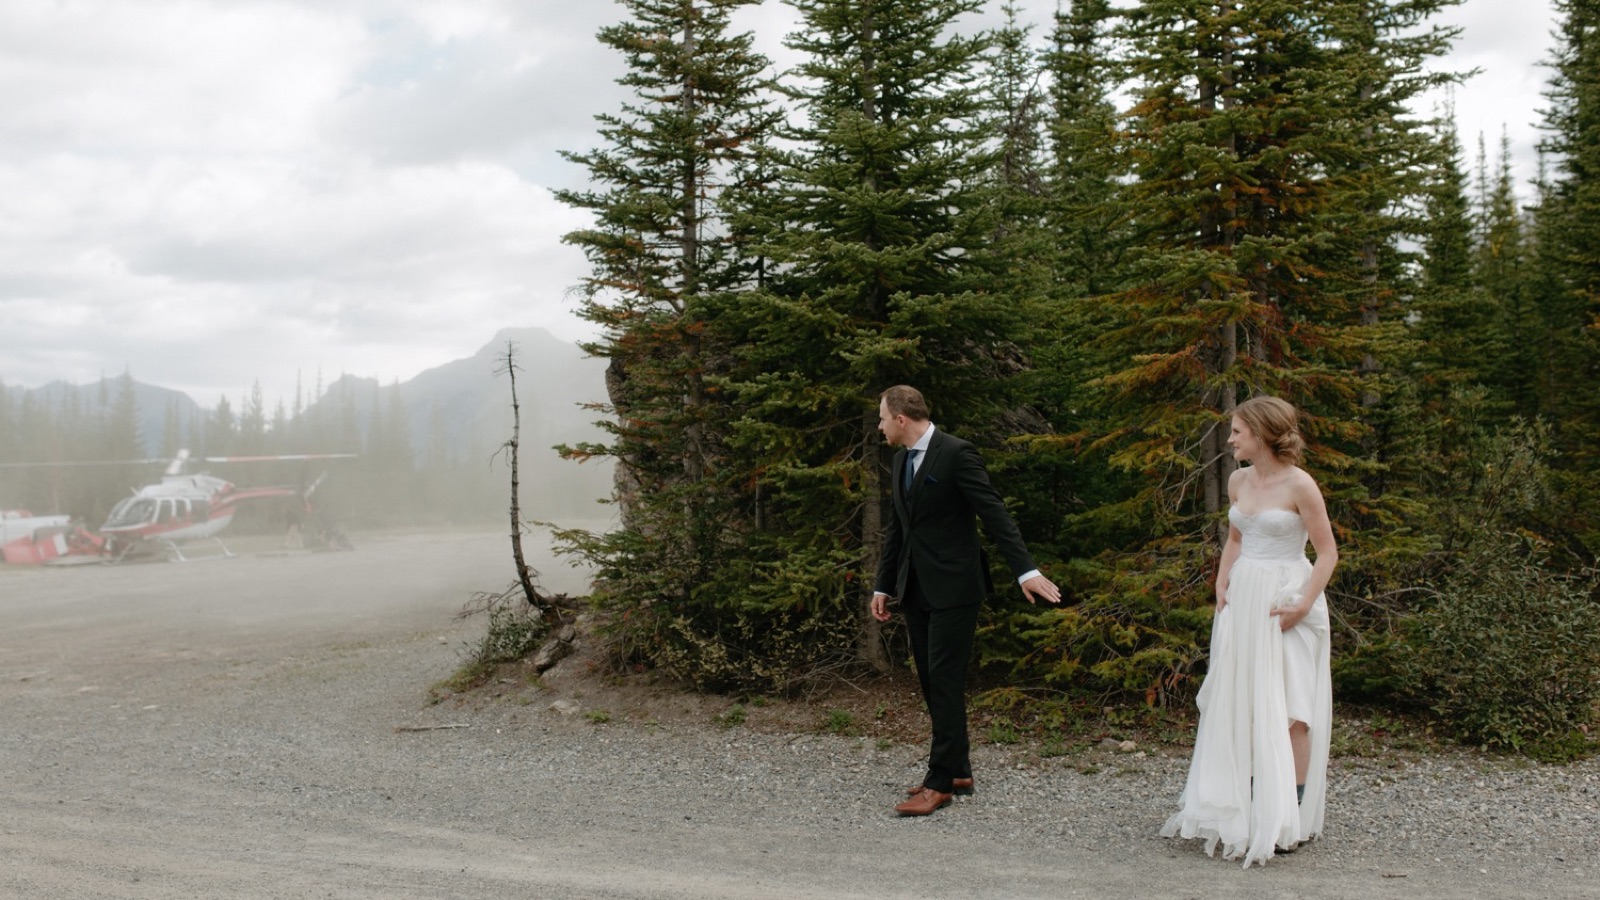 Wedding couple hiding from helicopter dust storm in Kananaskis